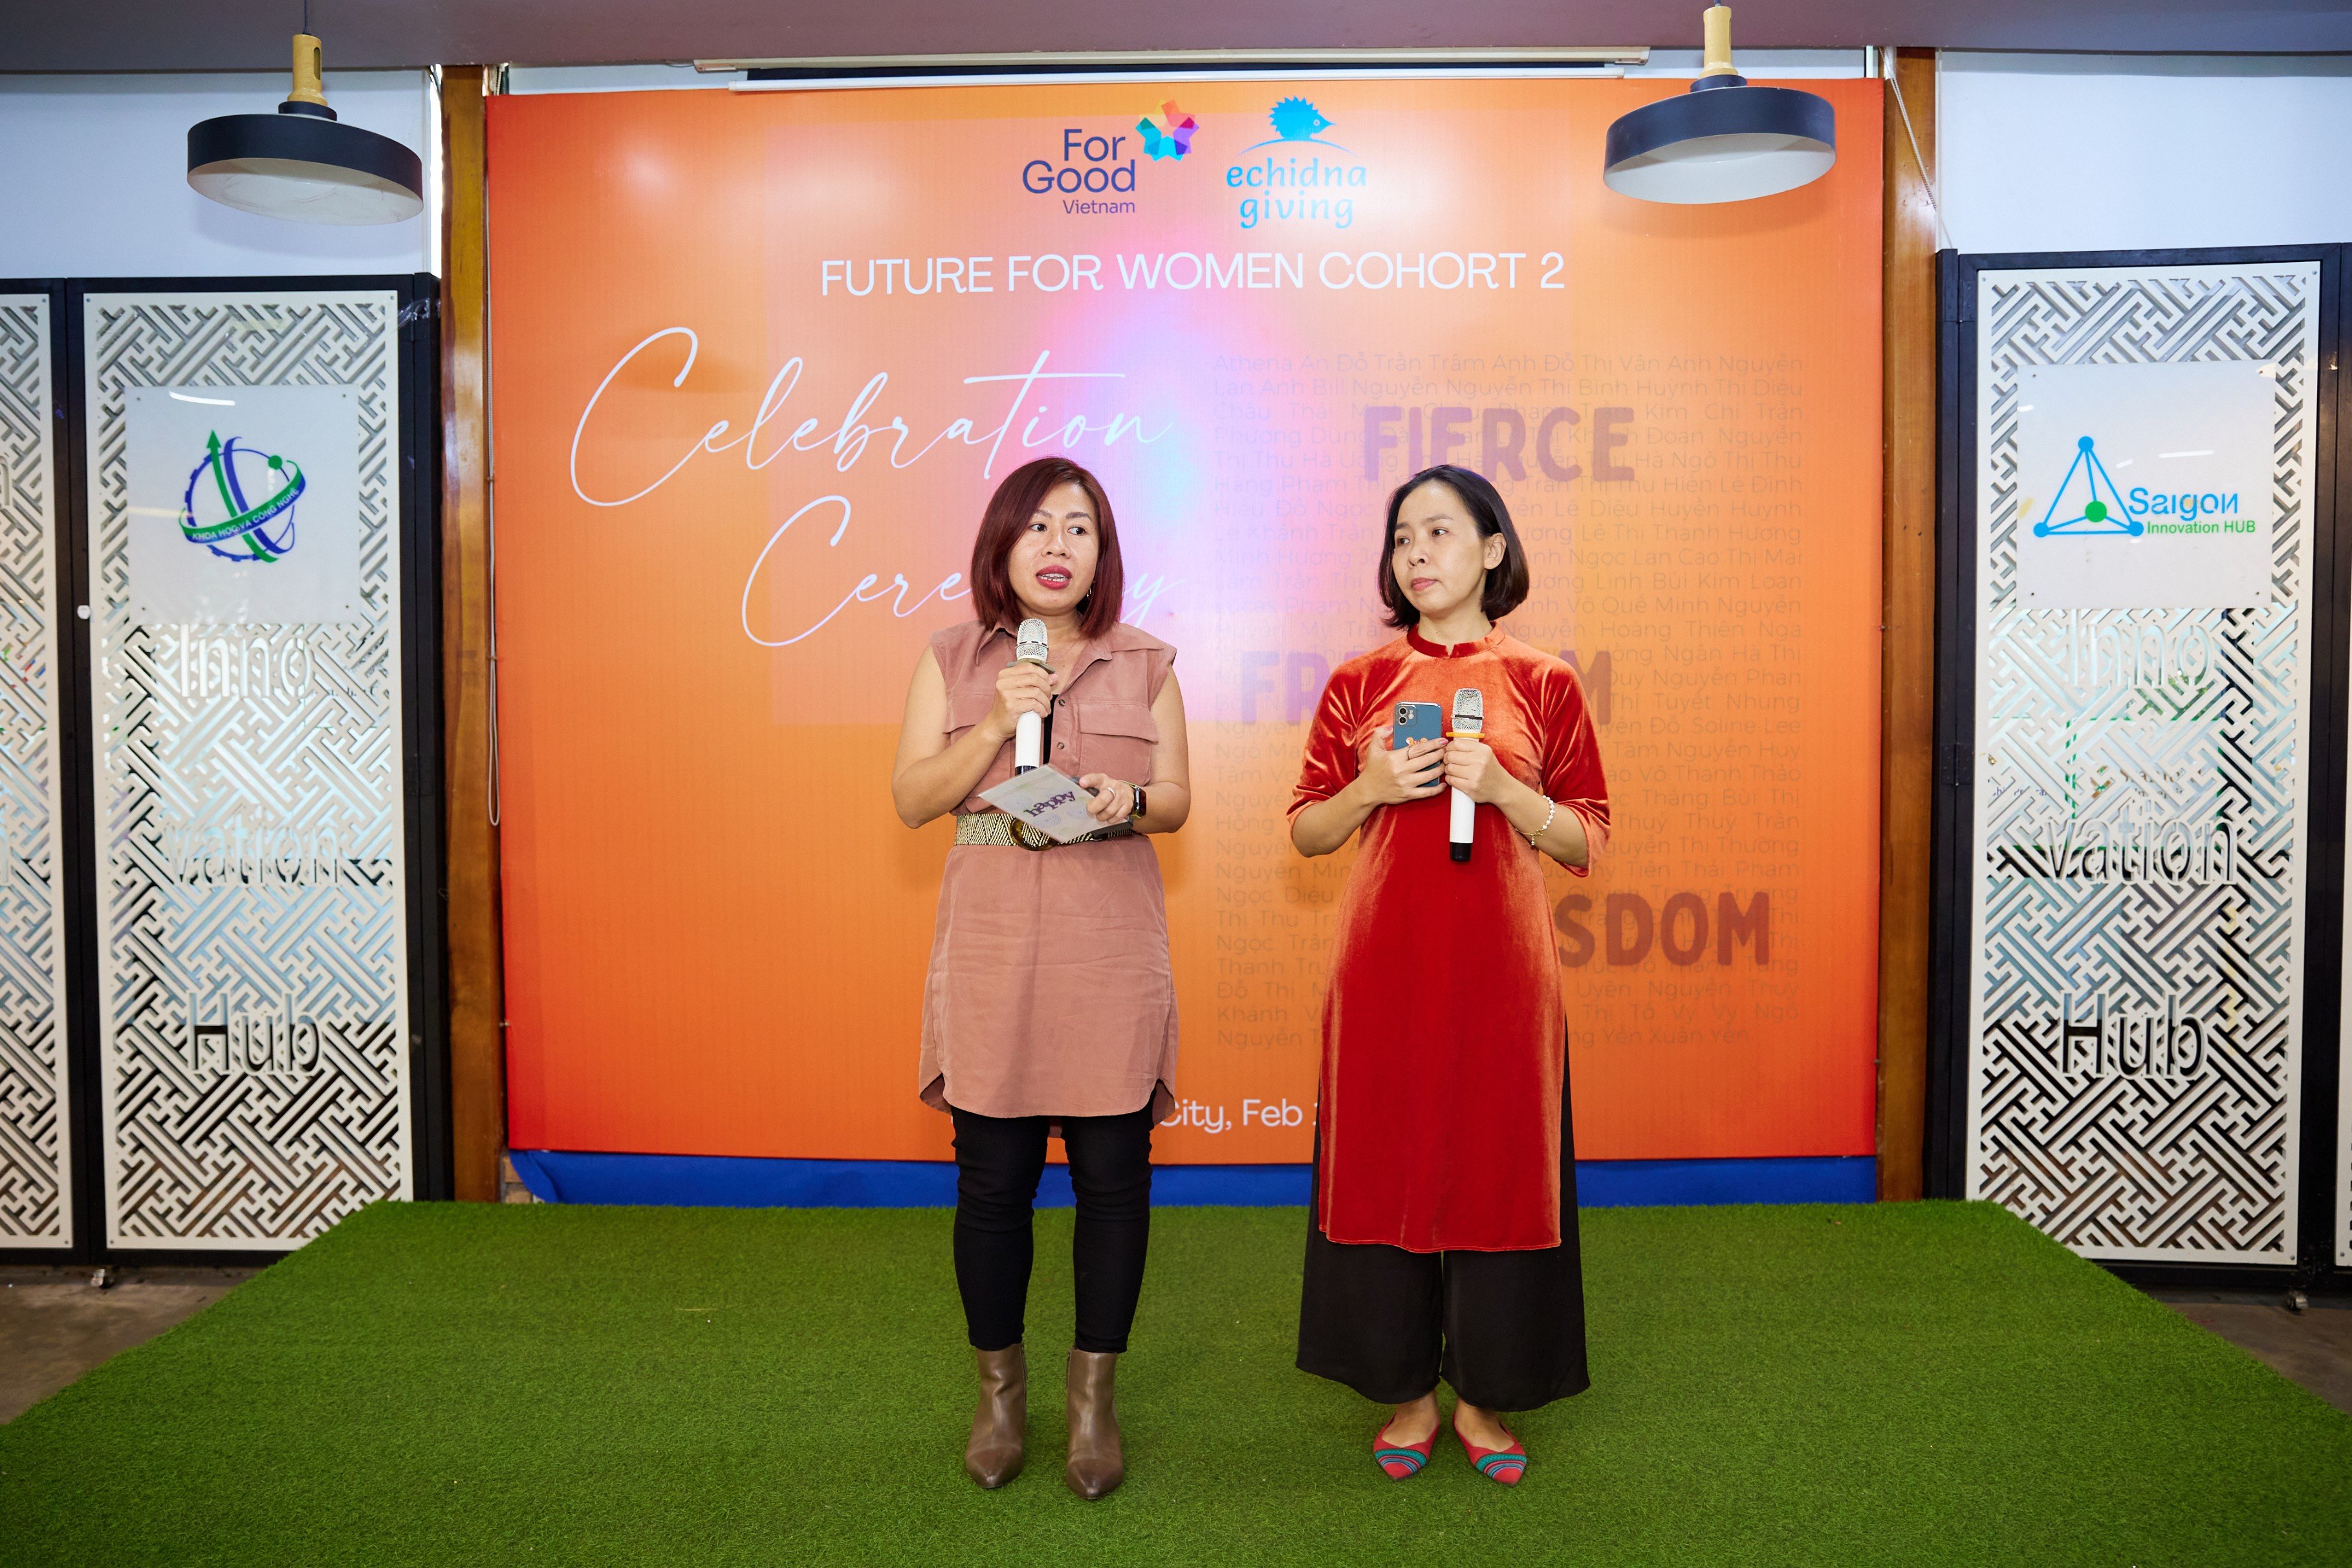 Mentees present their final business plan reports to the advisory board of the six-month Future For Women program at a ceremony on February 11, 2023. Photo: ForGood Vietnam